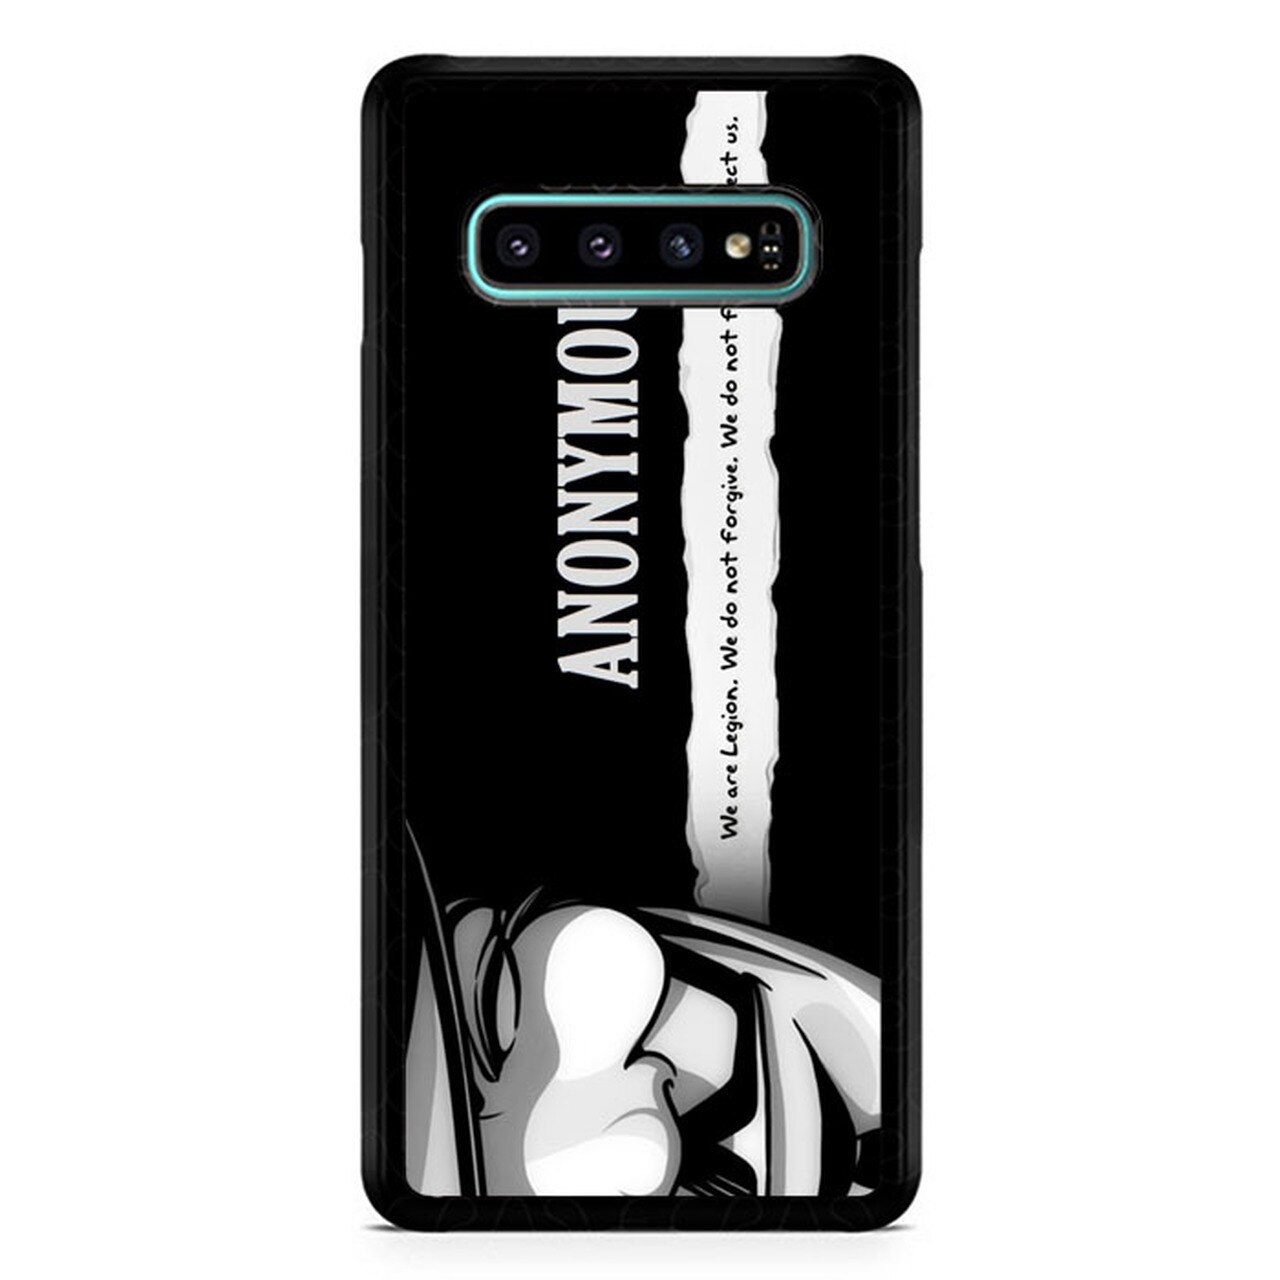 anonymous wallpaper,mobile phone case,mobile phone accessories,technology,electronic device